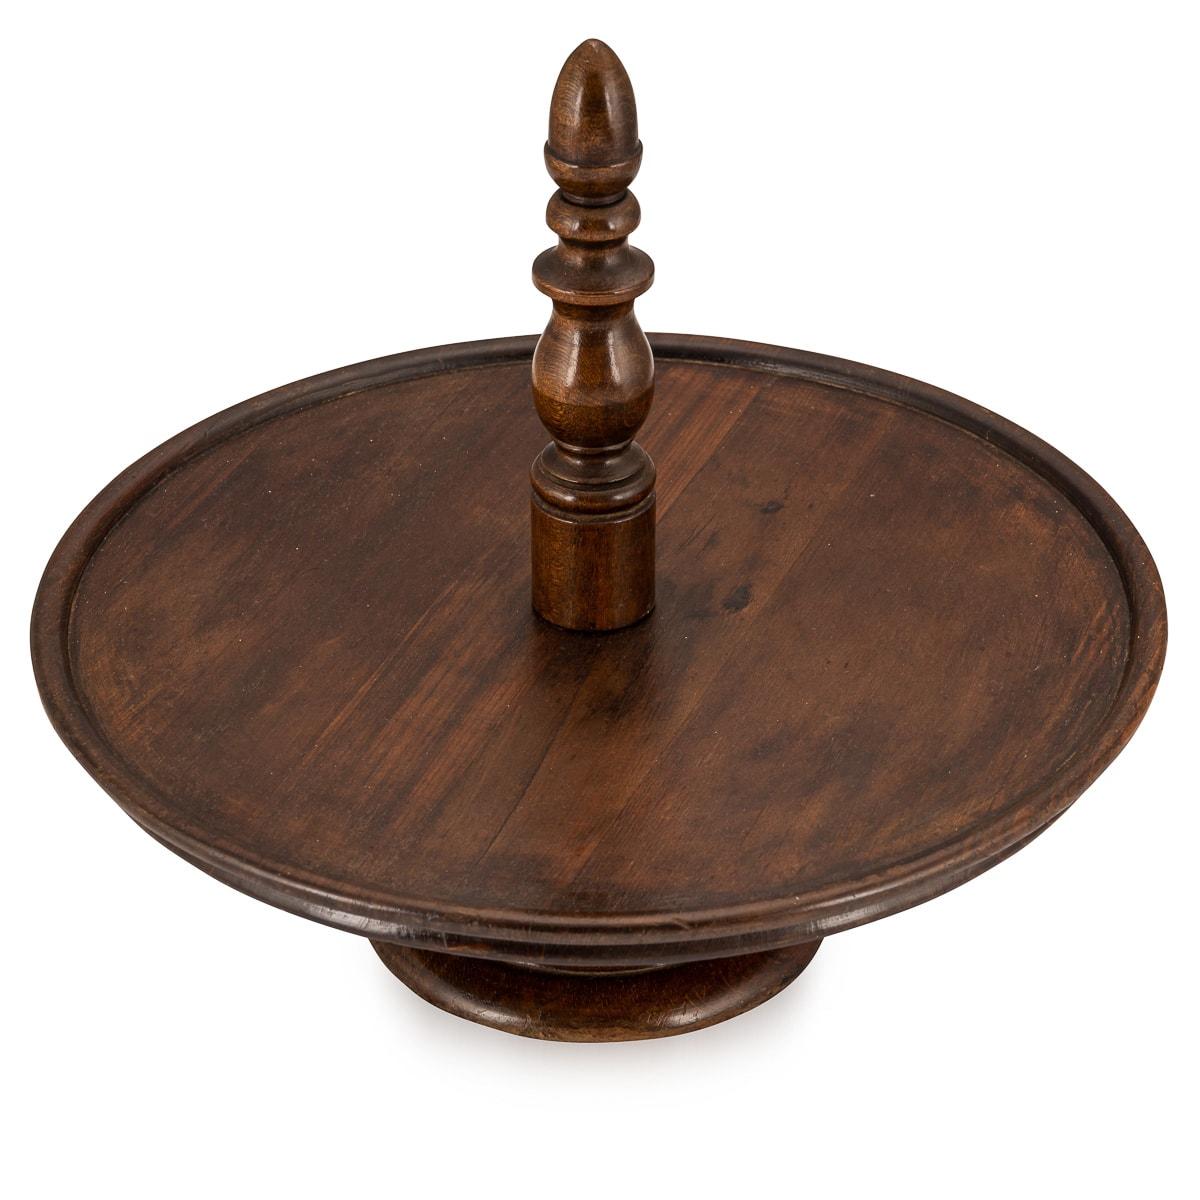 A lovely oak Lazy Susan, made in England around the 1930s. A Lazy Susan is a round tray that rotates and is designed to sit on a countertop or table and allow multiple diners to access food, condiments and relishes without having to pass them